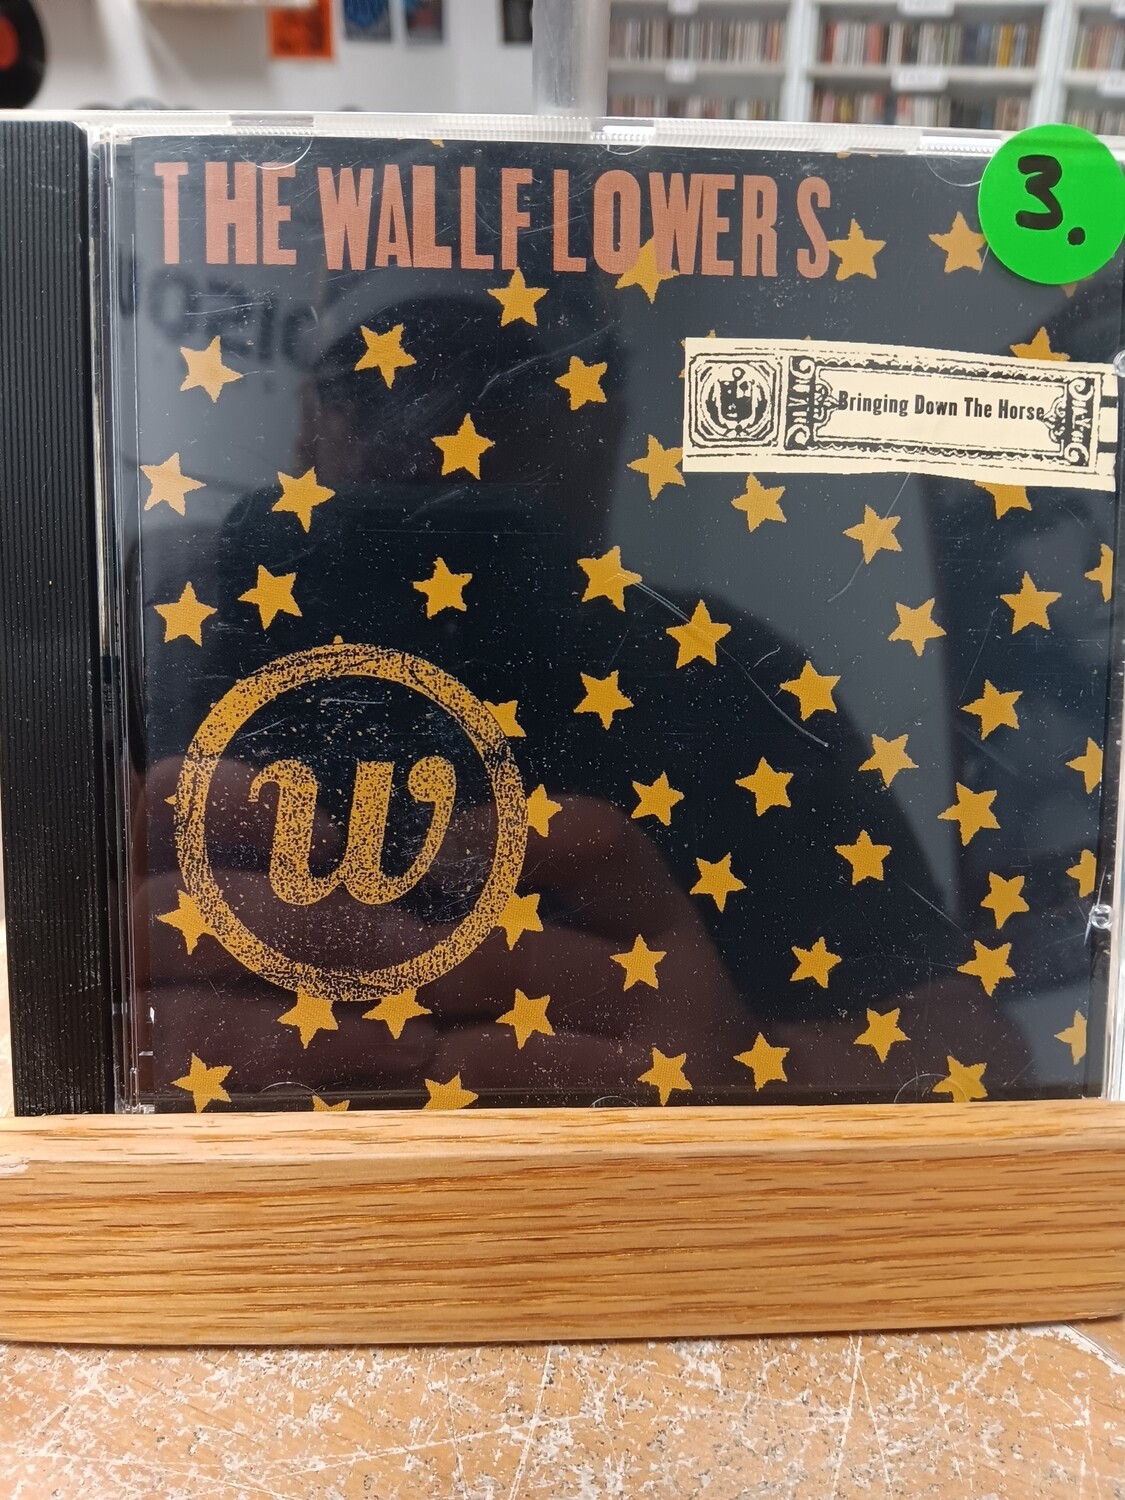 The Wallflowers - Bringing down the horse (CD)